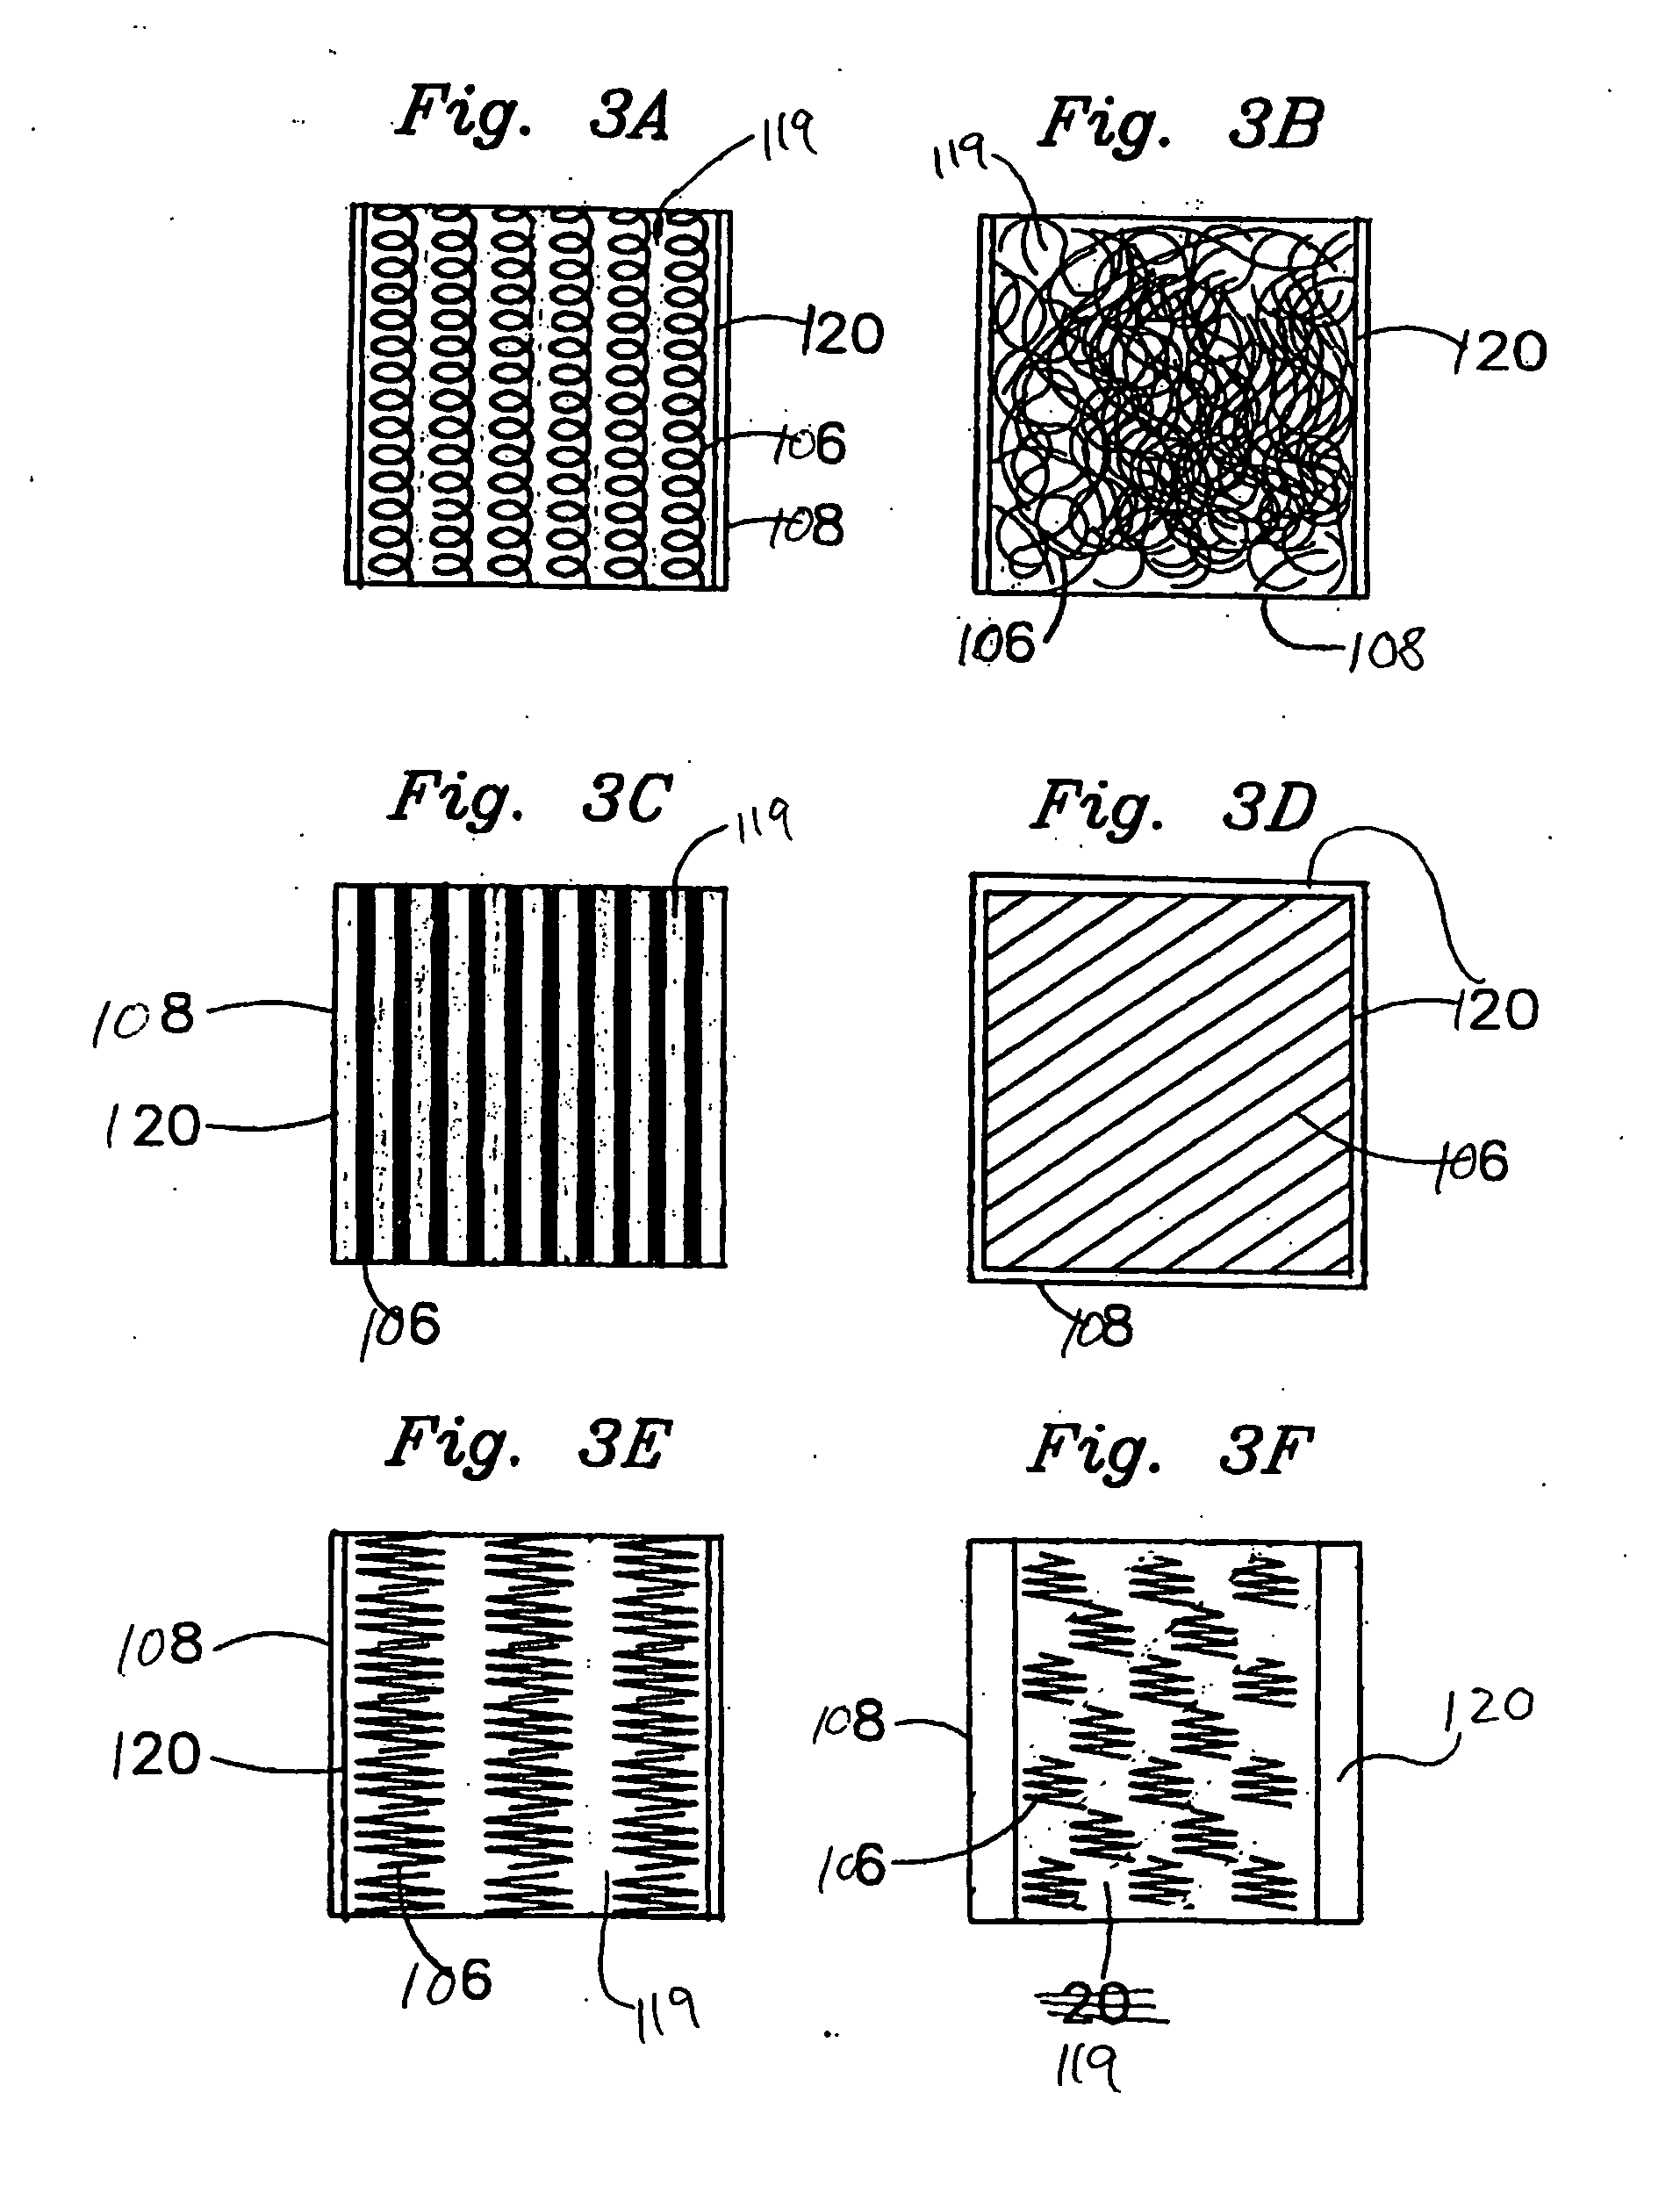 Absorbent cores for absorbent articles and method for making same